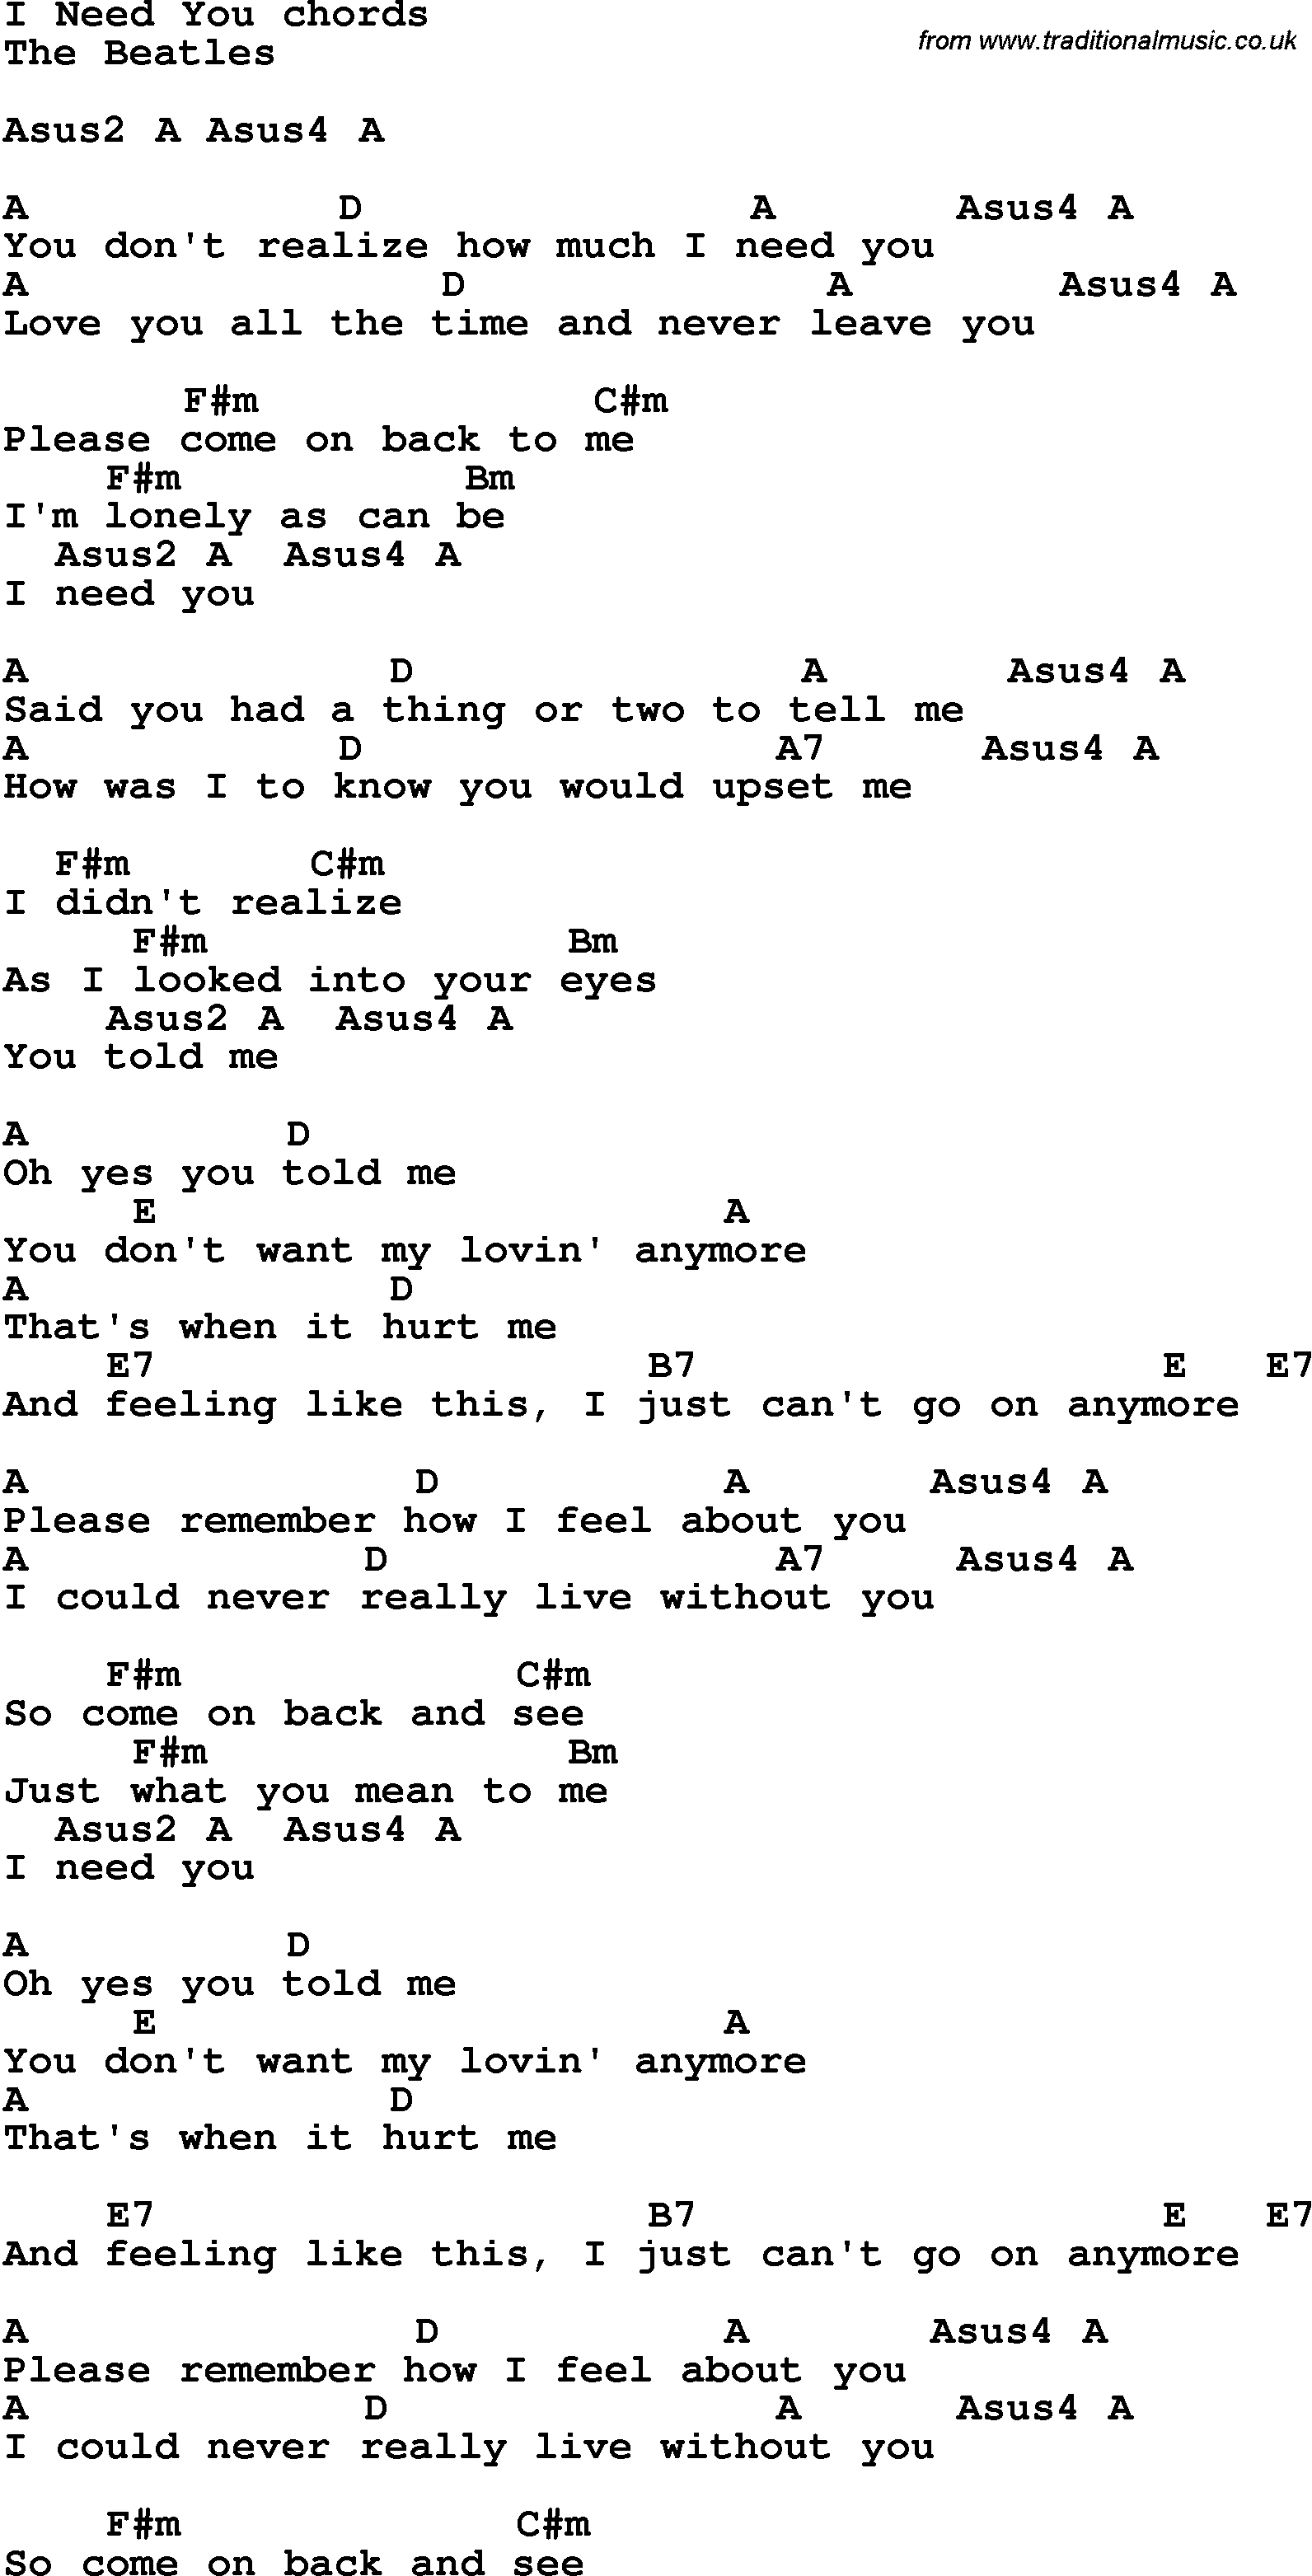 Song Lyrics with guitar chords for I Need You - The Beatle